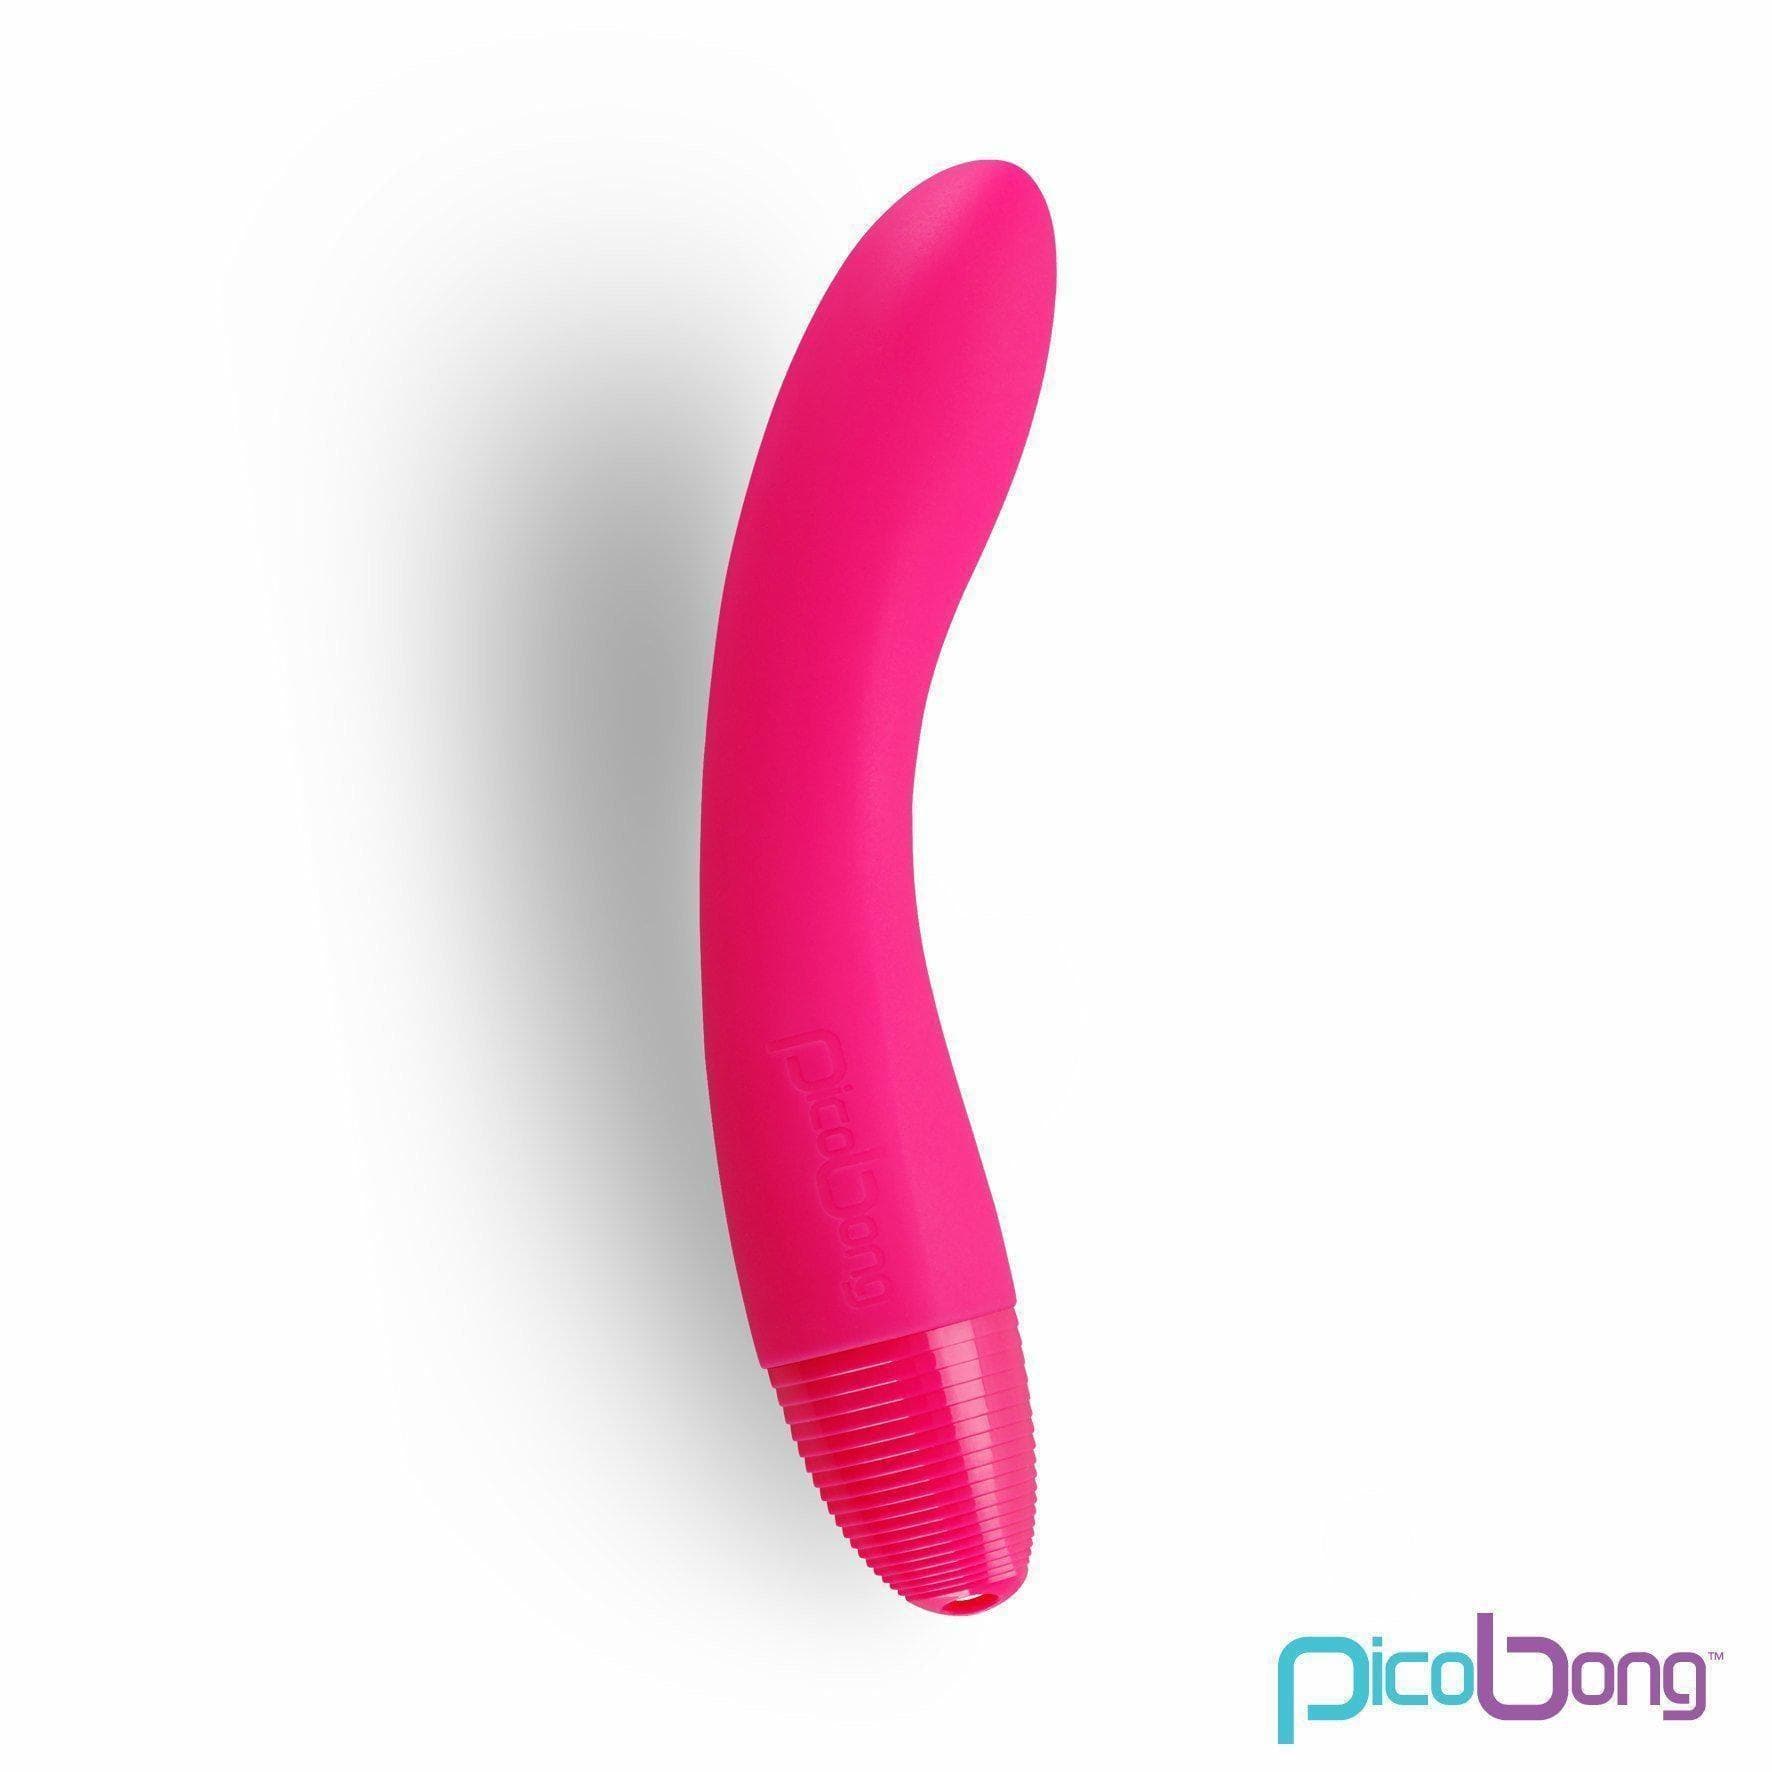 Zizo Pico Bong Perfectly Curved G-Spot 12 Mode Waterproof Vibrator - Romantic Blessings